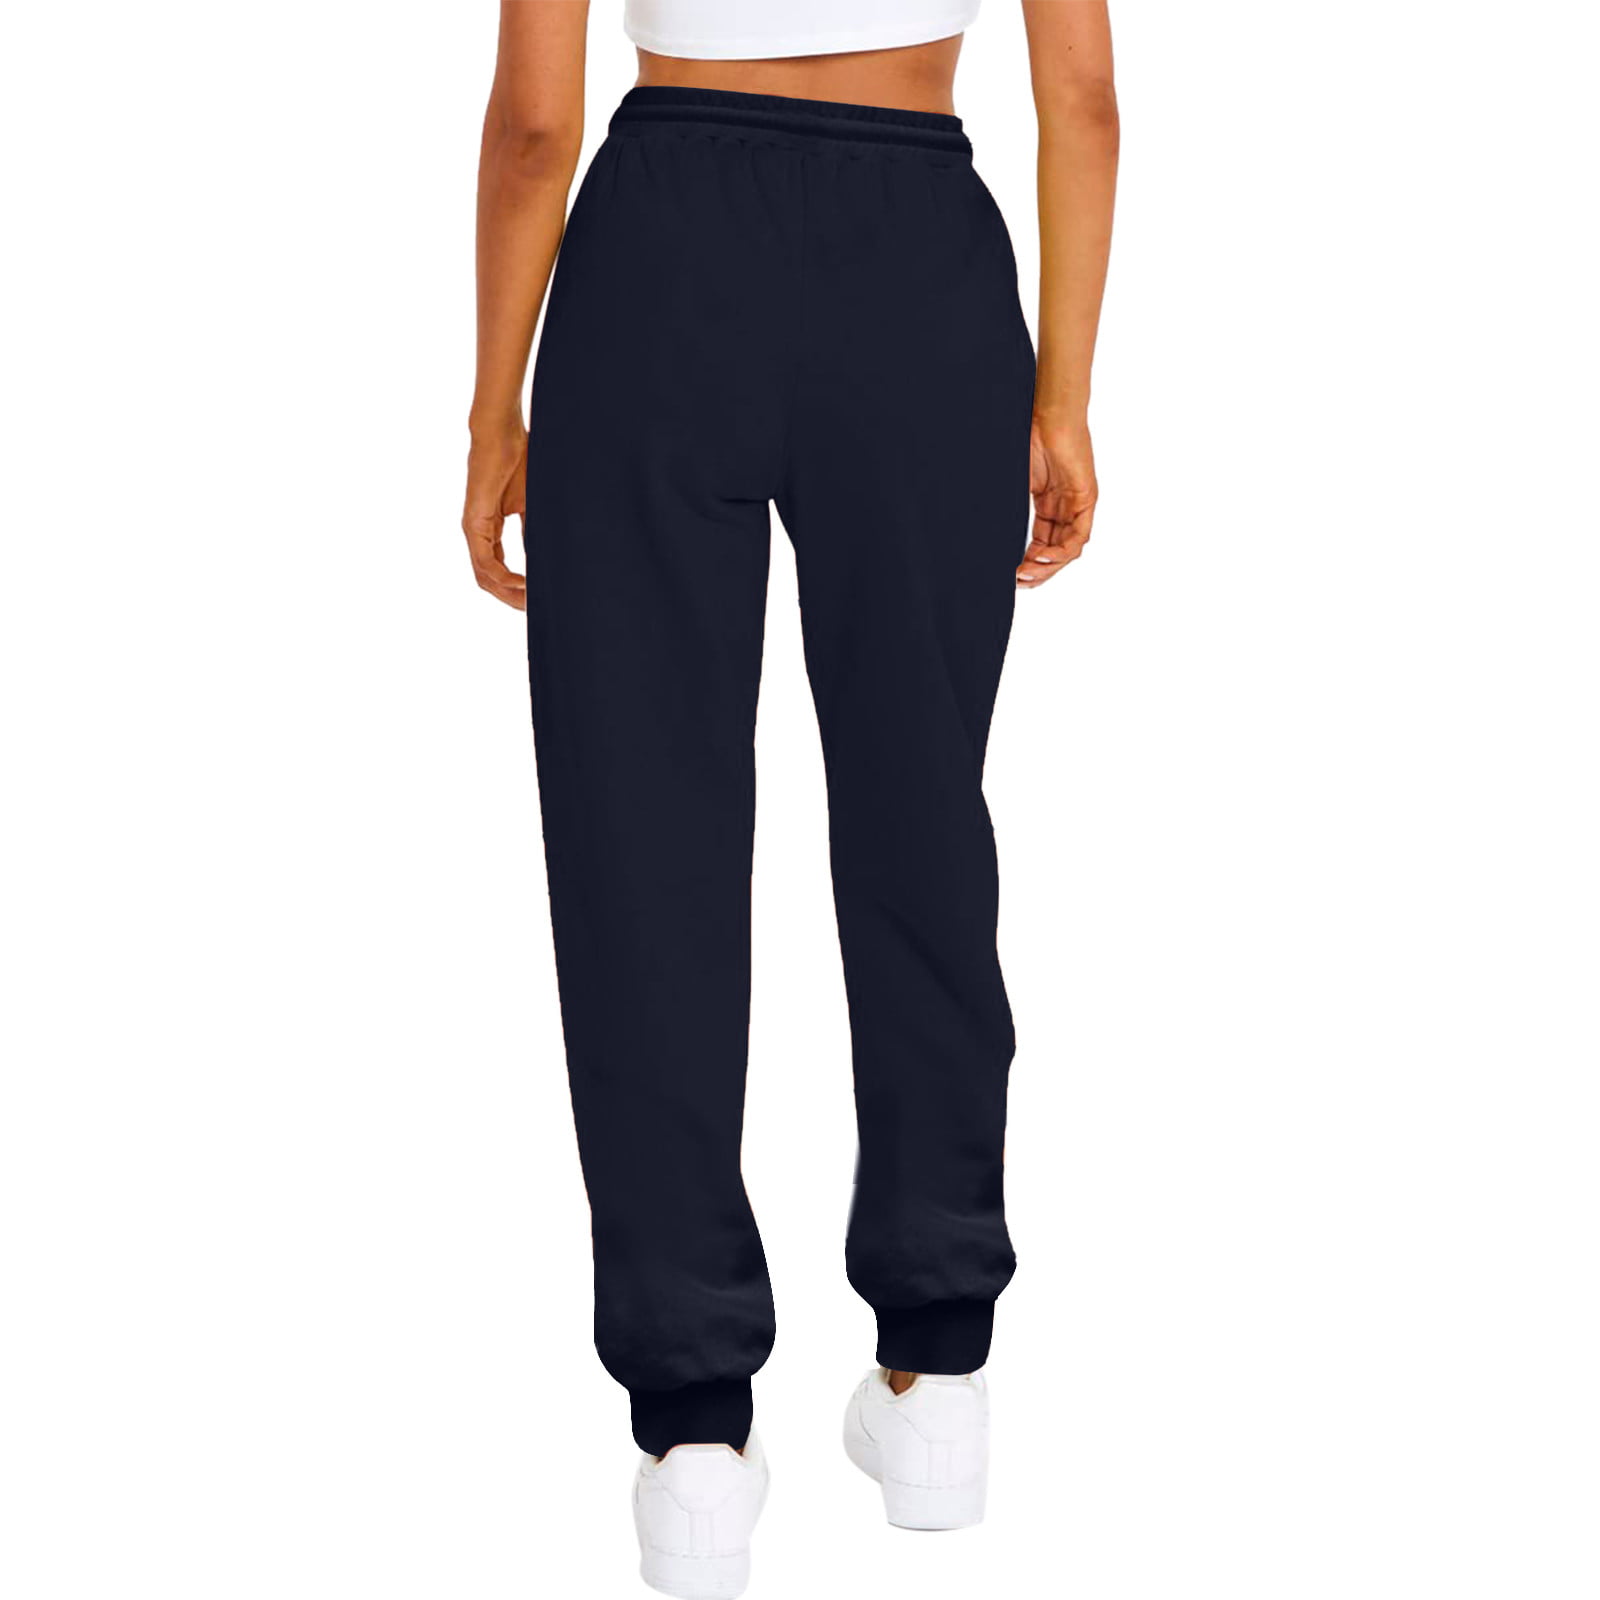 Space Navy Women's Cotton Solid Joggers, Waist Size: 24-26 at Rs